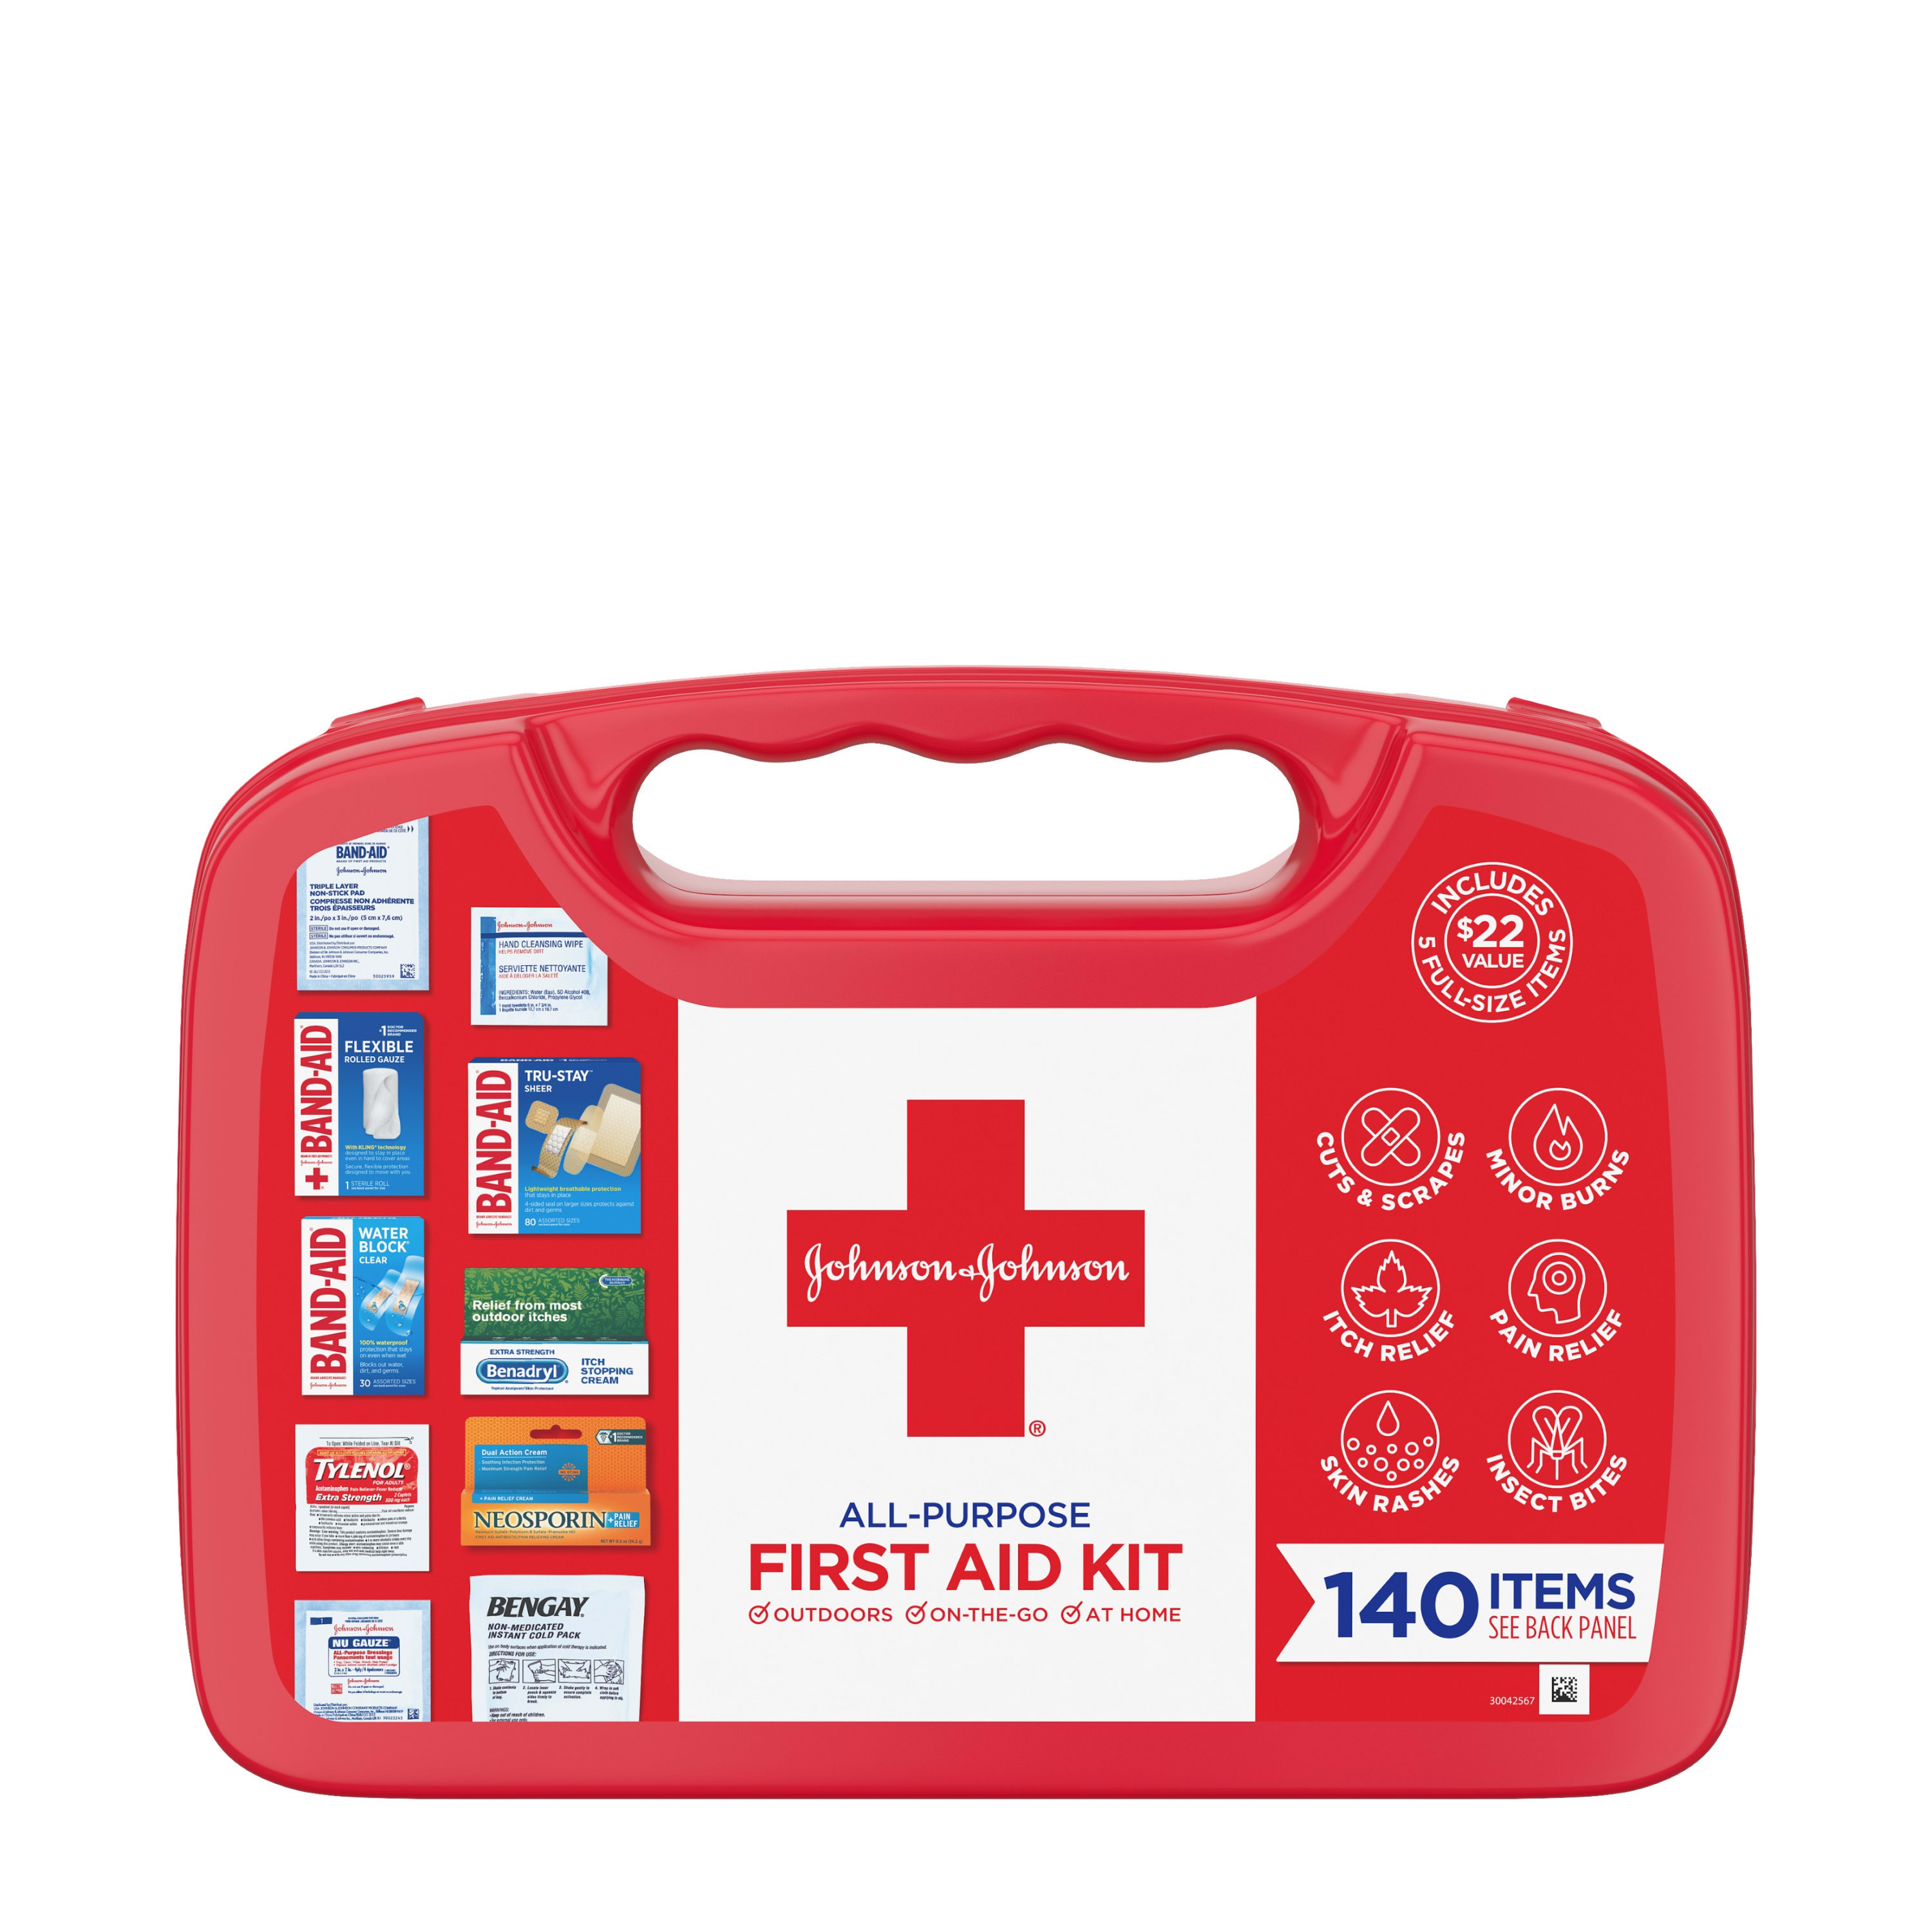 Johnson & Johnson All-Purpose Portable Compact First Aid Kit, 140 pc - image 1 of 14